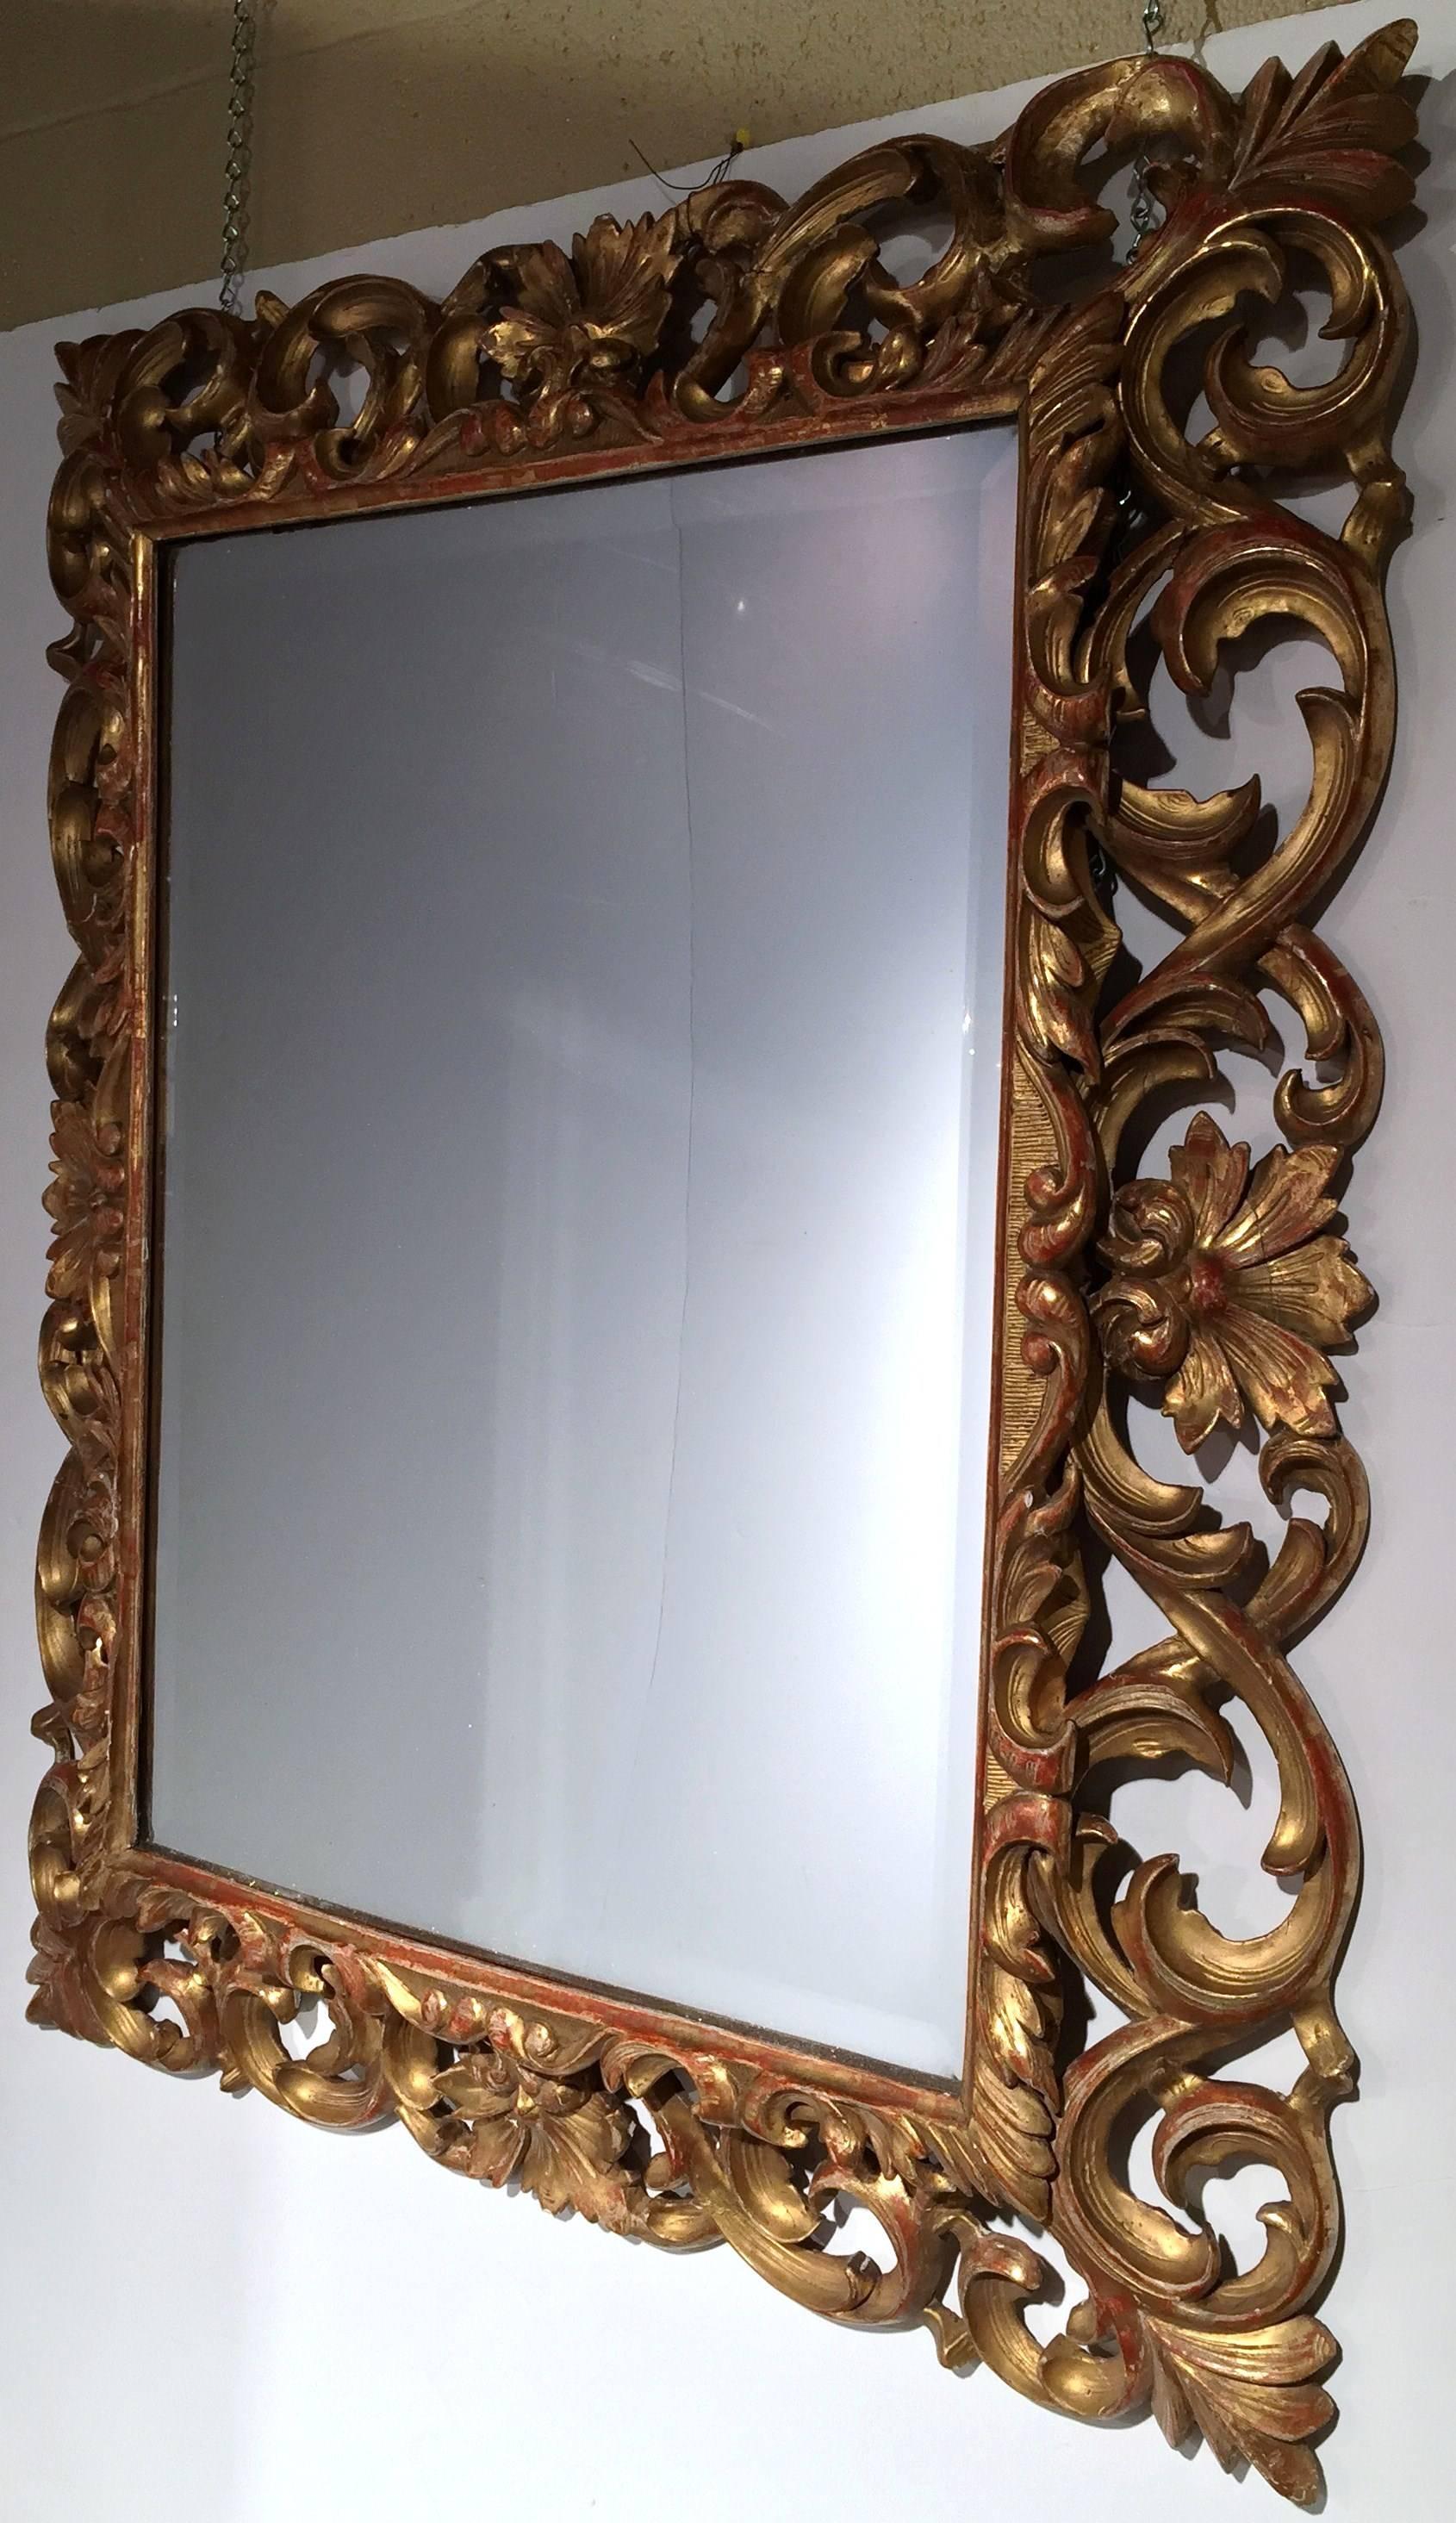 Incorporate Classic French elegance into your home with this antique, ornate mirror. Crafted in France, circa 1860, the rectangular mirror has a wood frame adorning a rich gold leaf finish. The frame has a beautiful scroll design embellished with